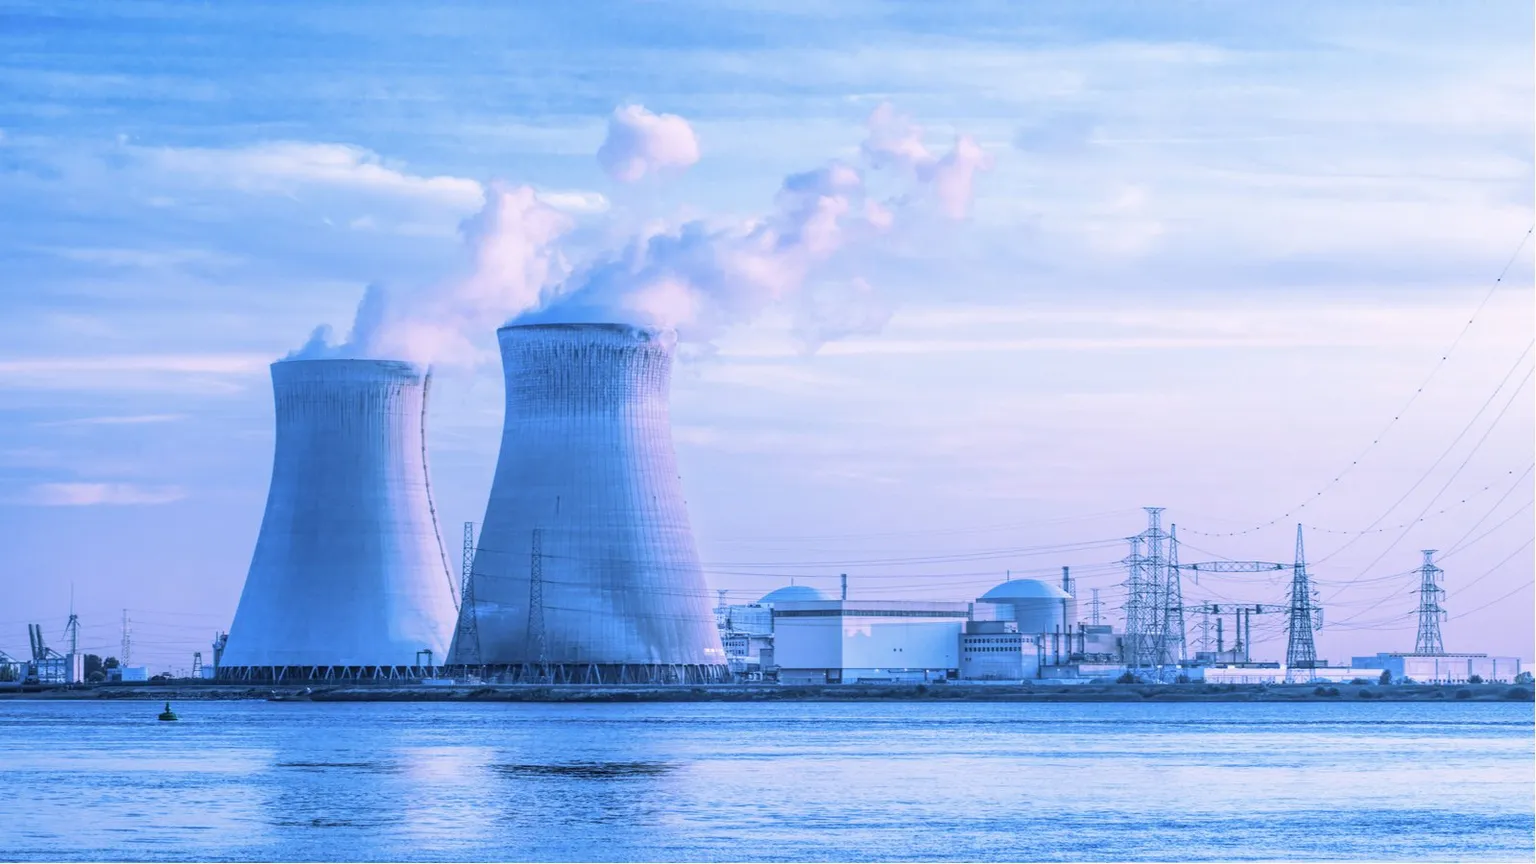 Bitcoin miners are turning to nuclear energy to offset carbon emissions. Image: Shutterstock